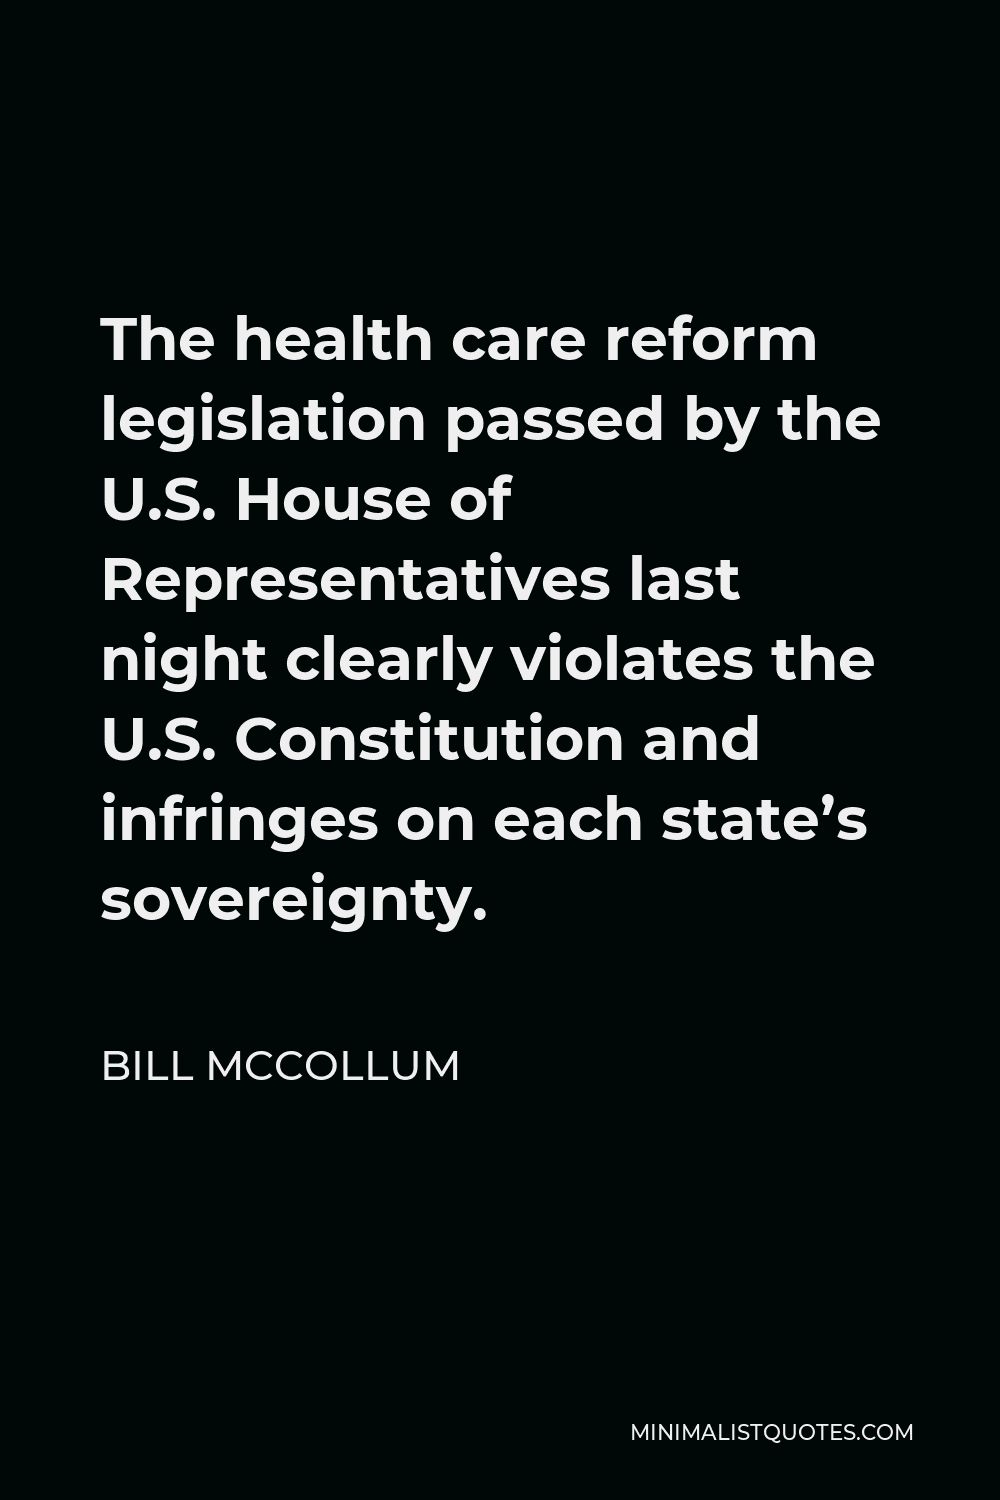 Bill McCollum Quote - The health care reform legislation passed by the U.S. House of Representatives last night clearly violates the U.S. Constitution and infringes on each state’s sovereignty.